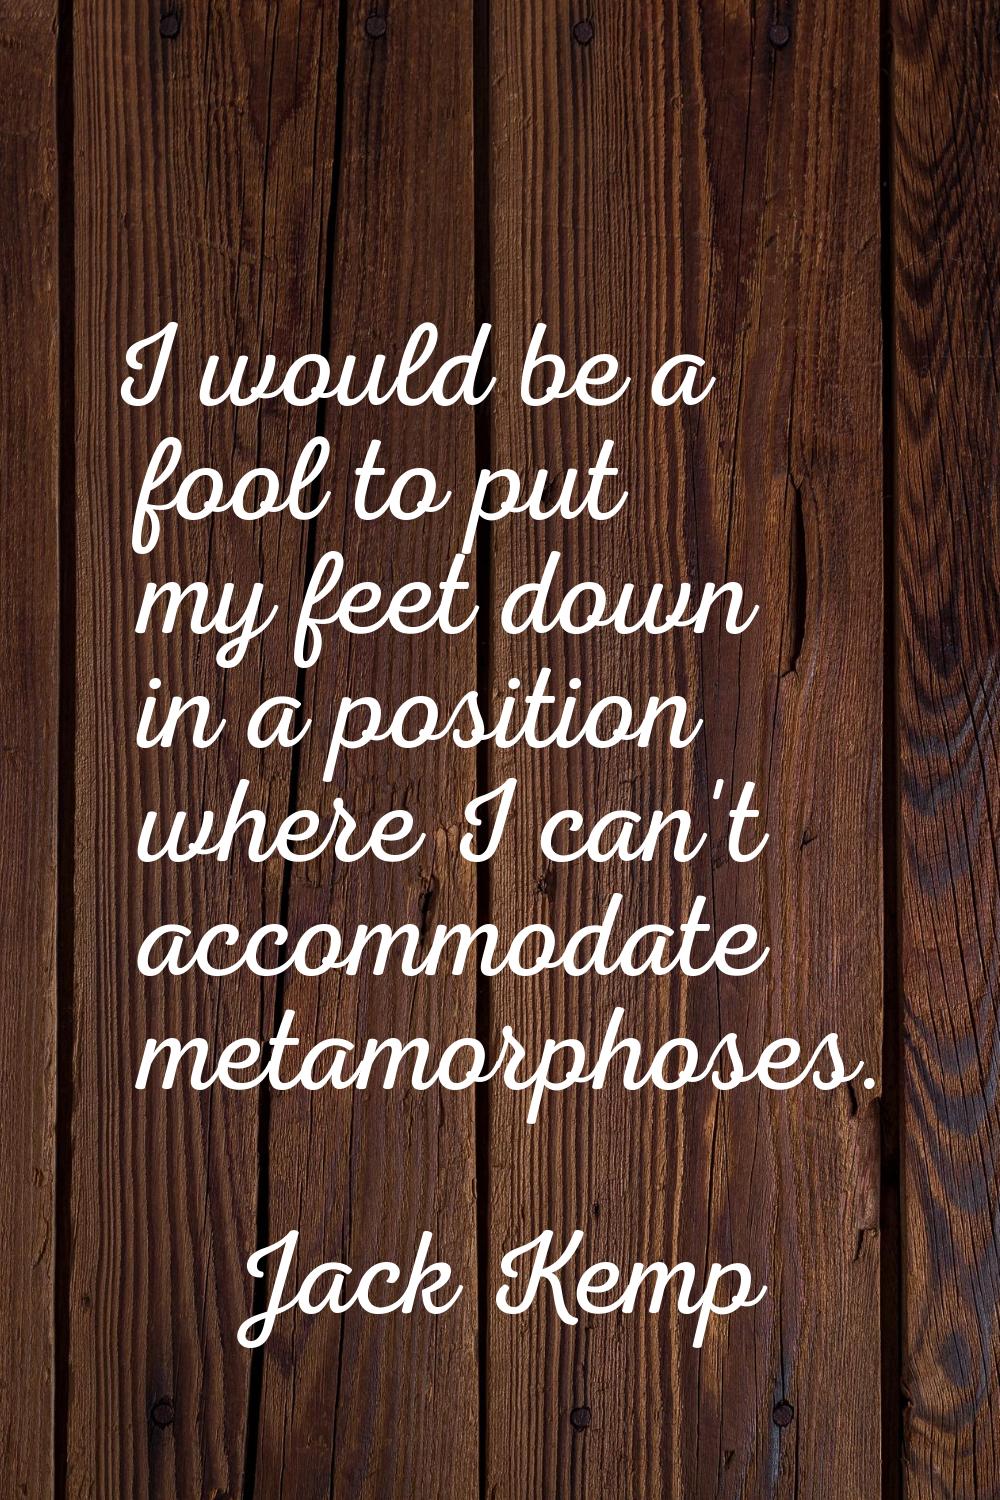 I would be a fool to put my feet down in a position where I can't accommodate metamorphoses.